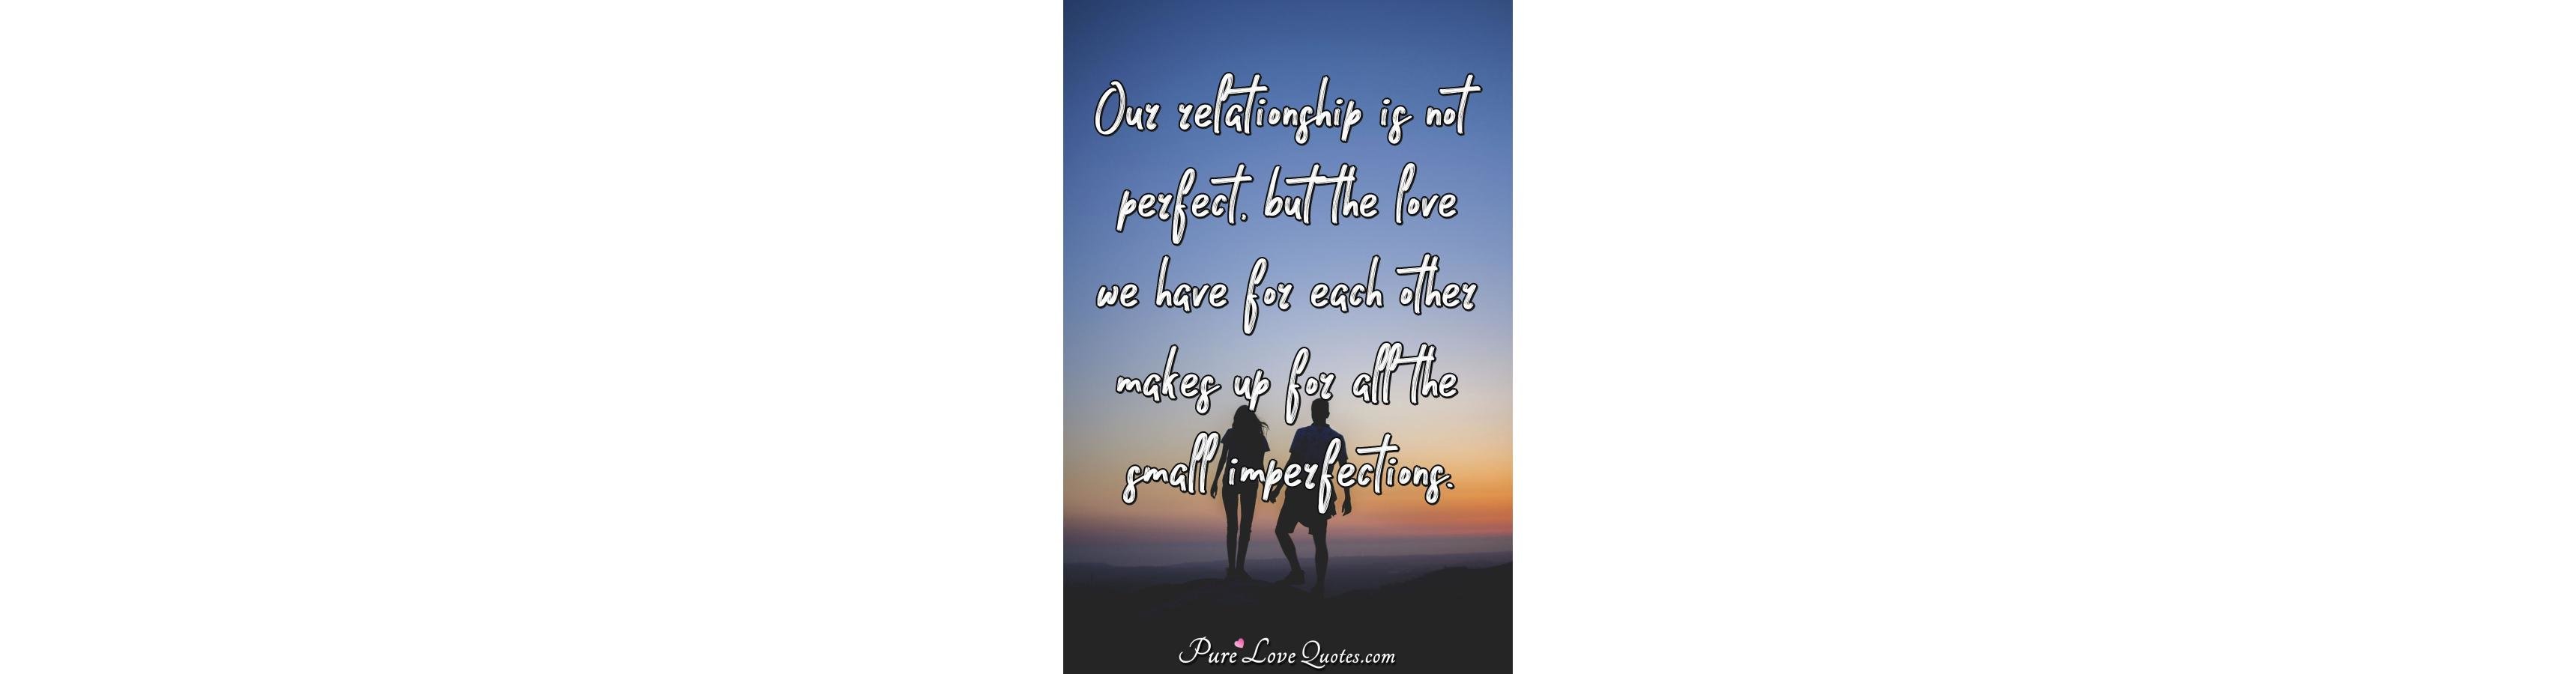 Our relationship is not perfect, but the love we have for each other